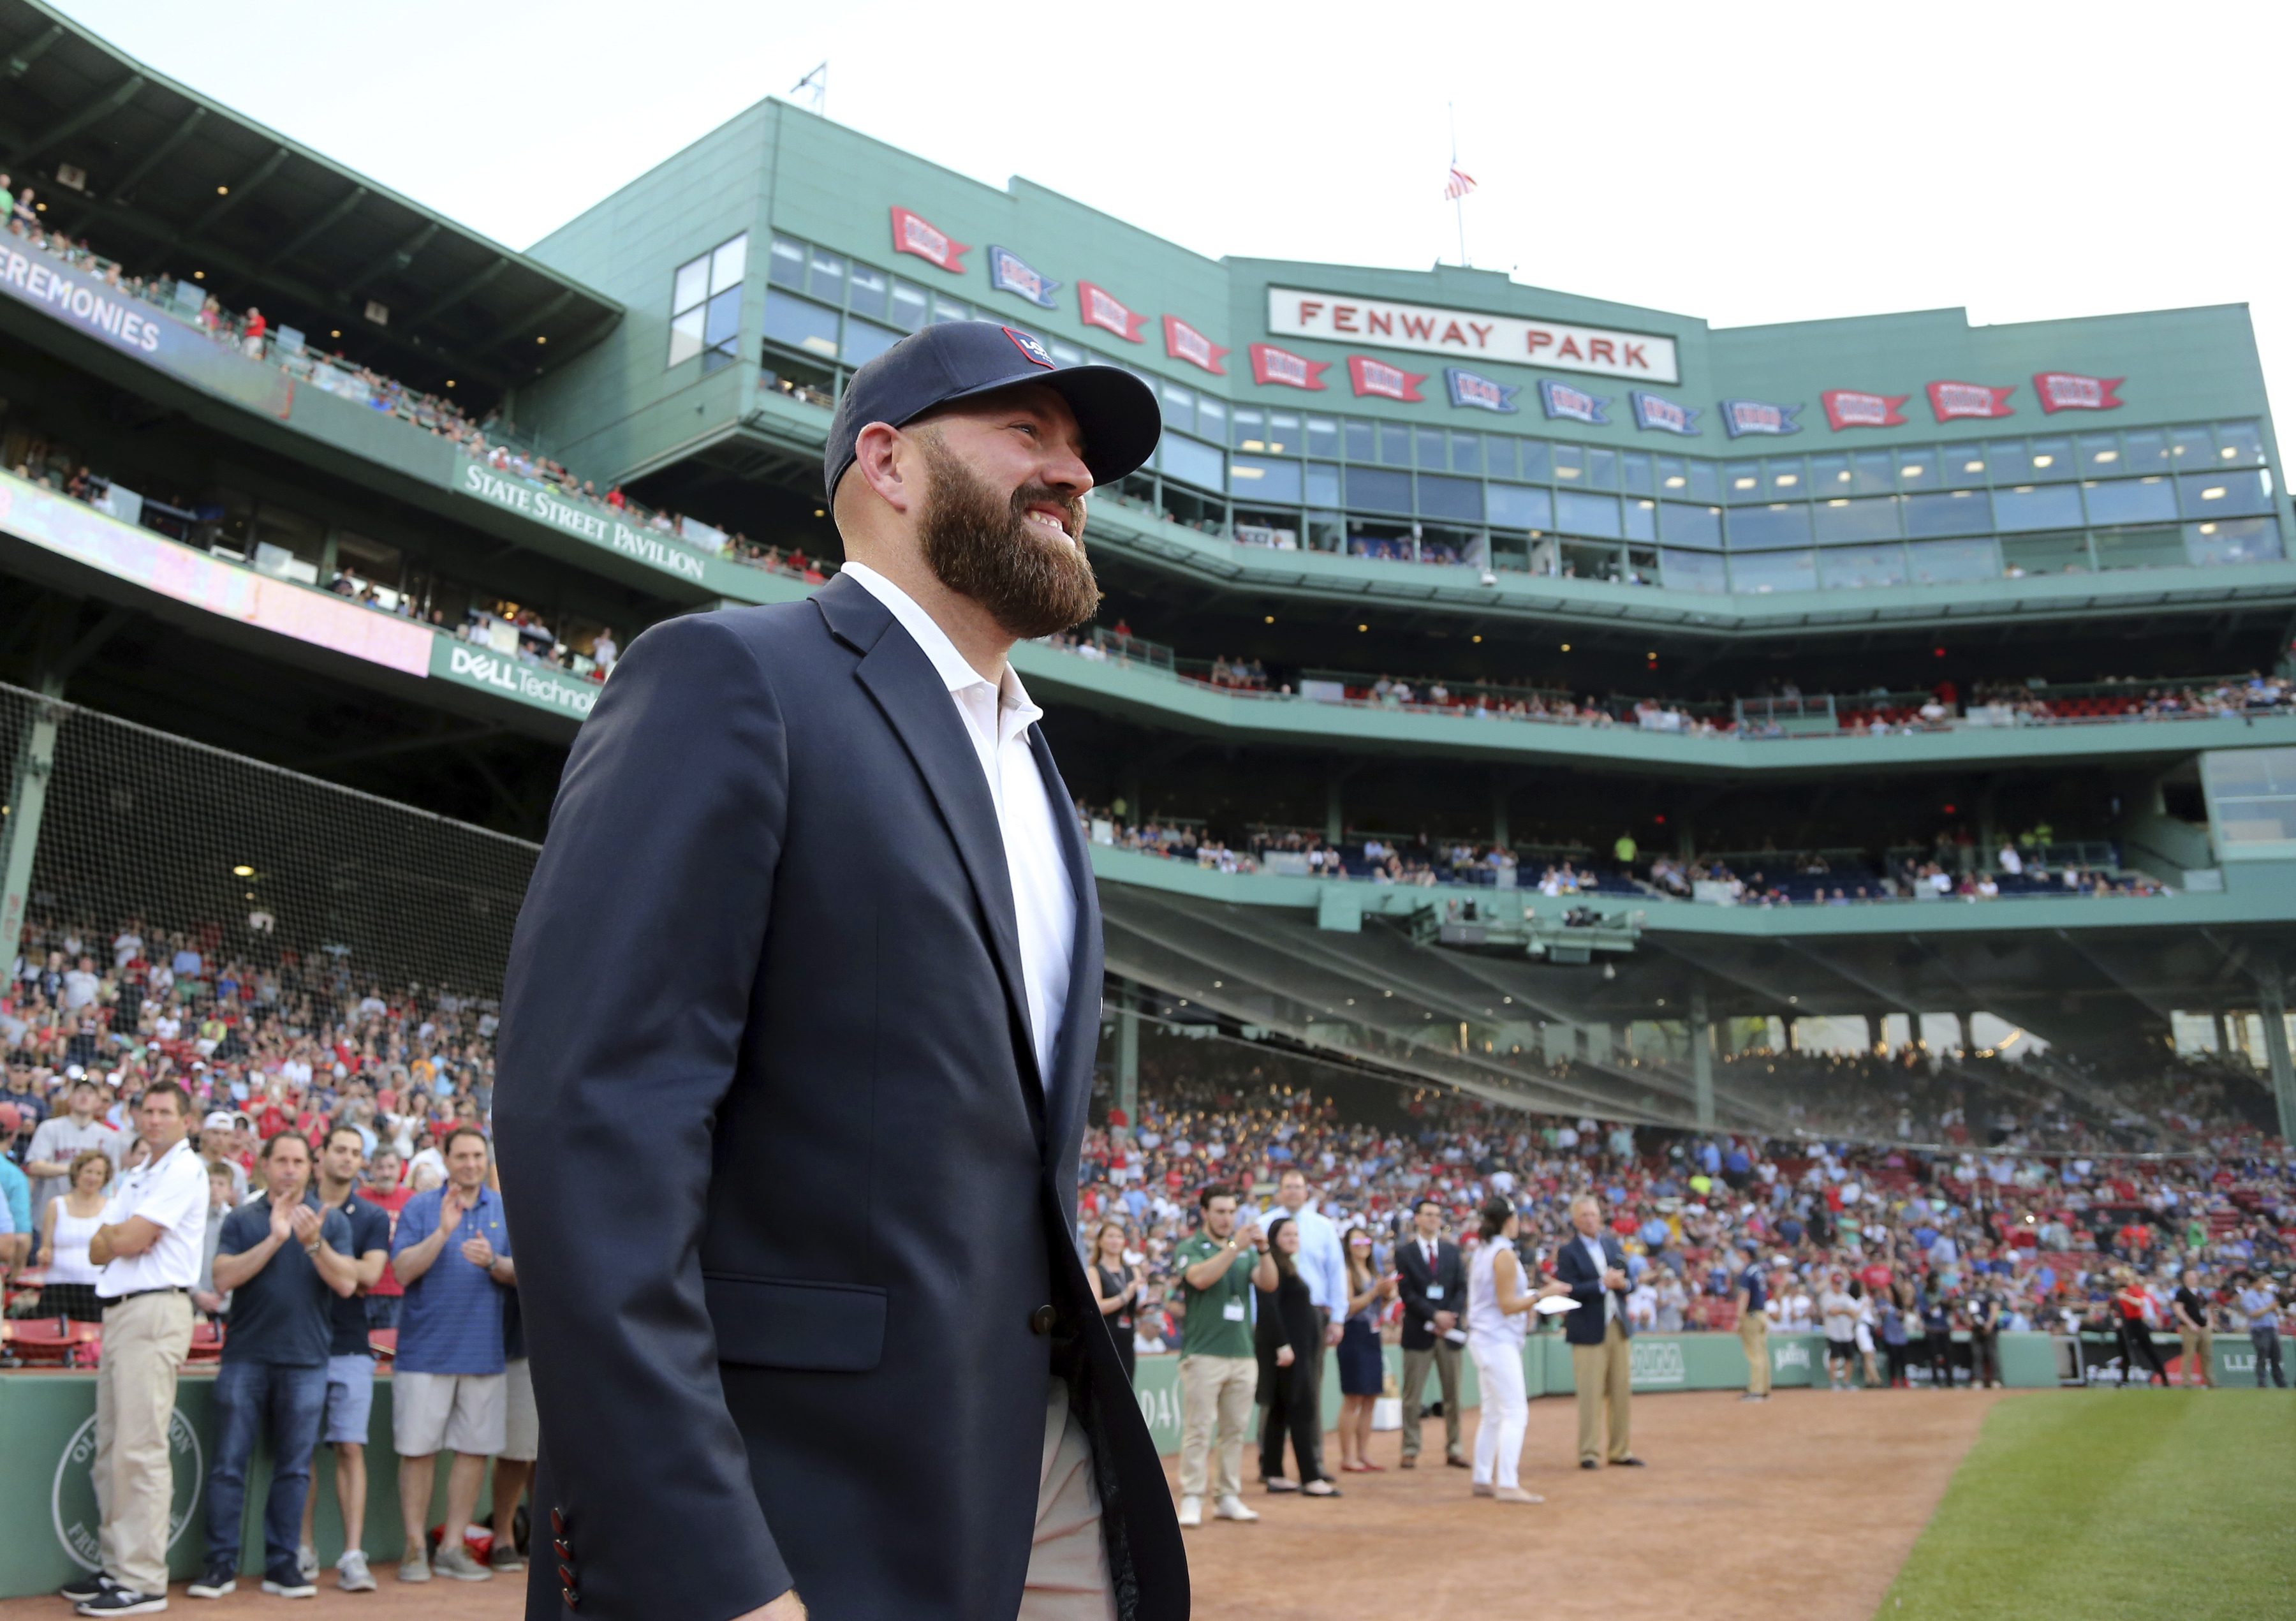 Report: Cubs hire Kevin Youkilis as special assistant